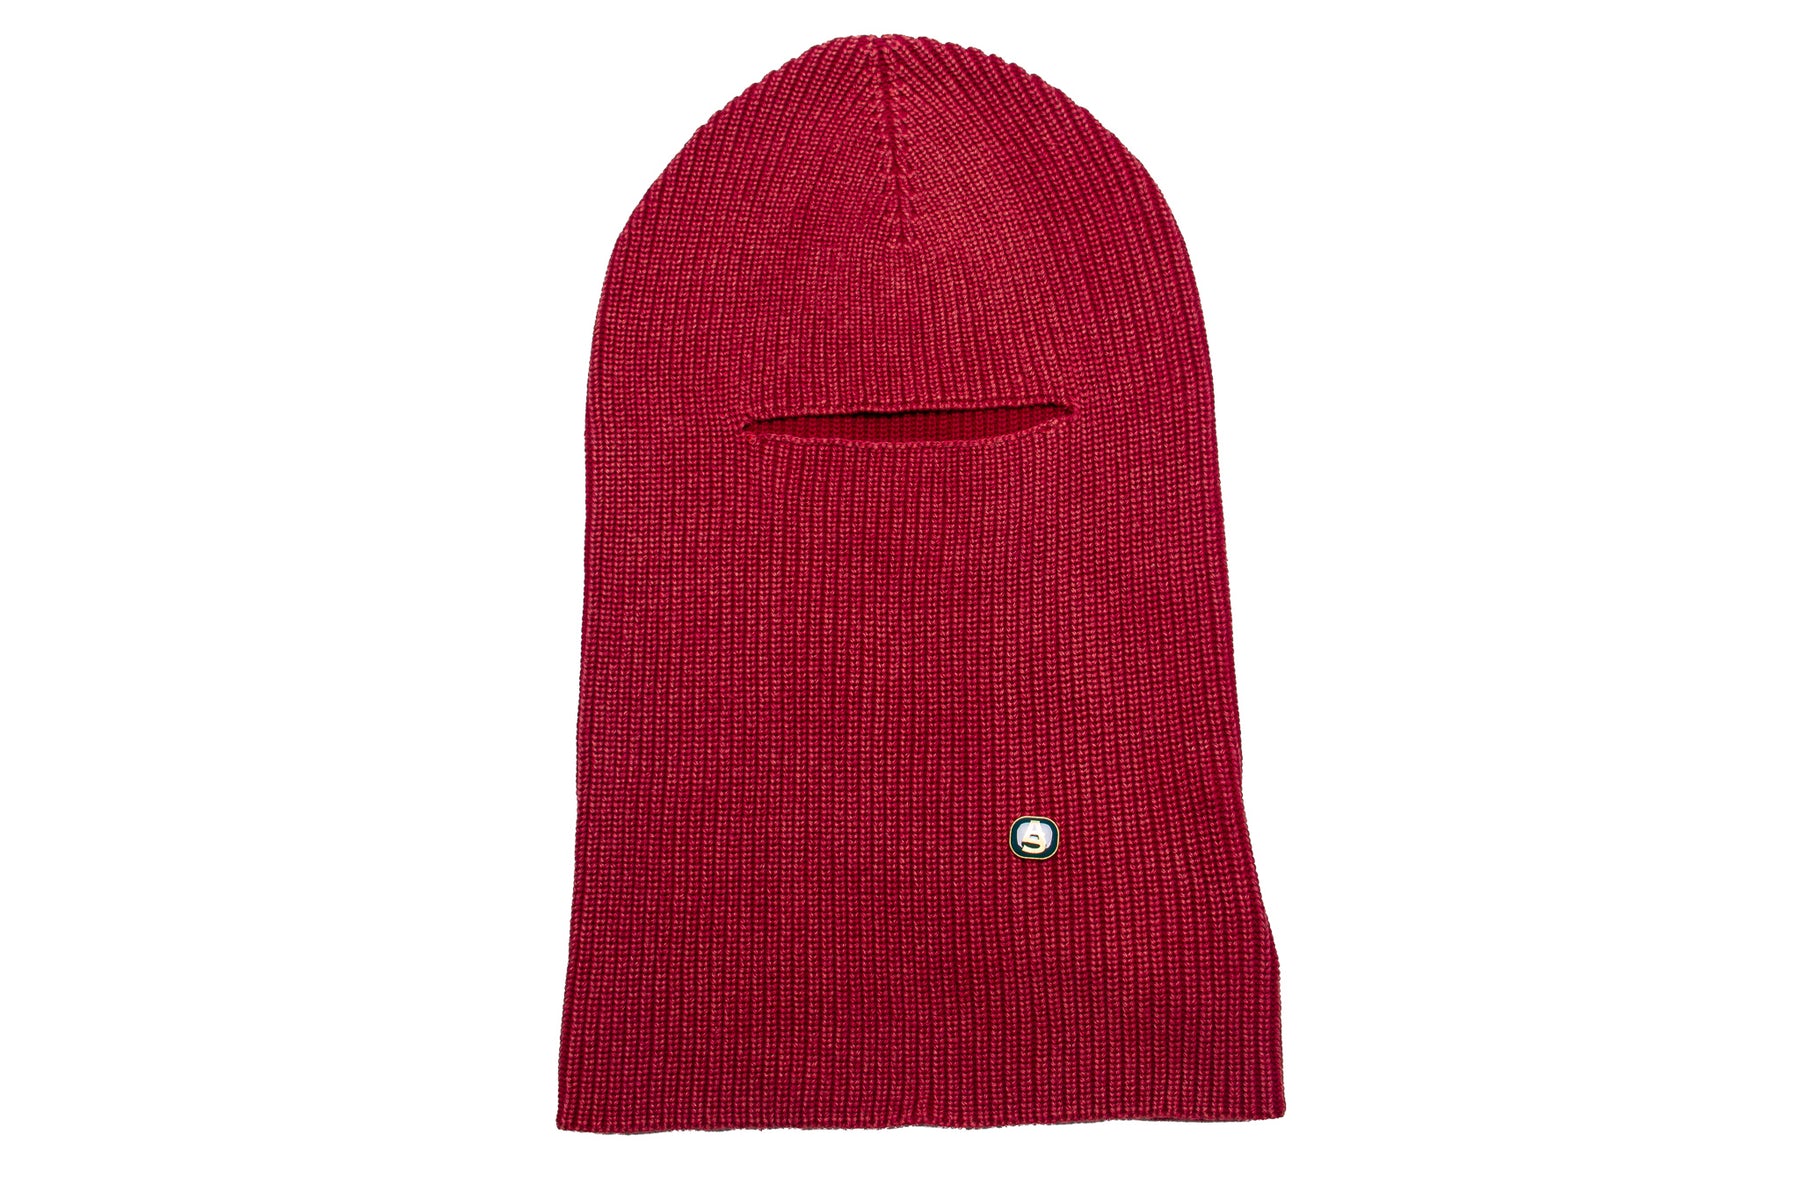 AlphaStyle Icacos Knitted Balaclava "Wine"